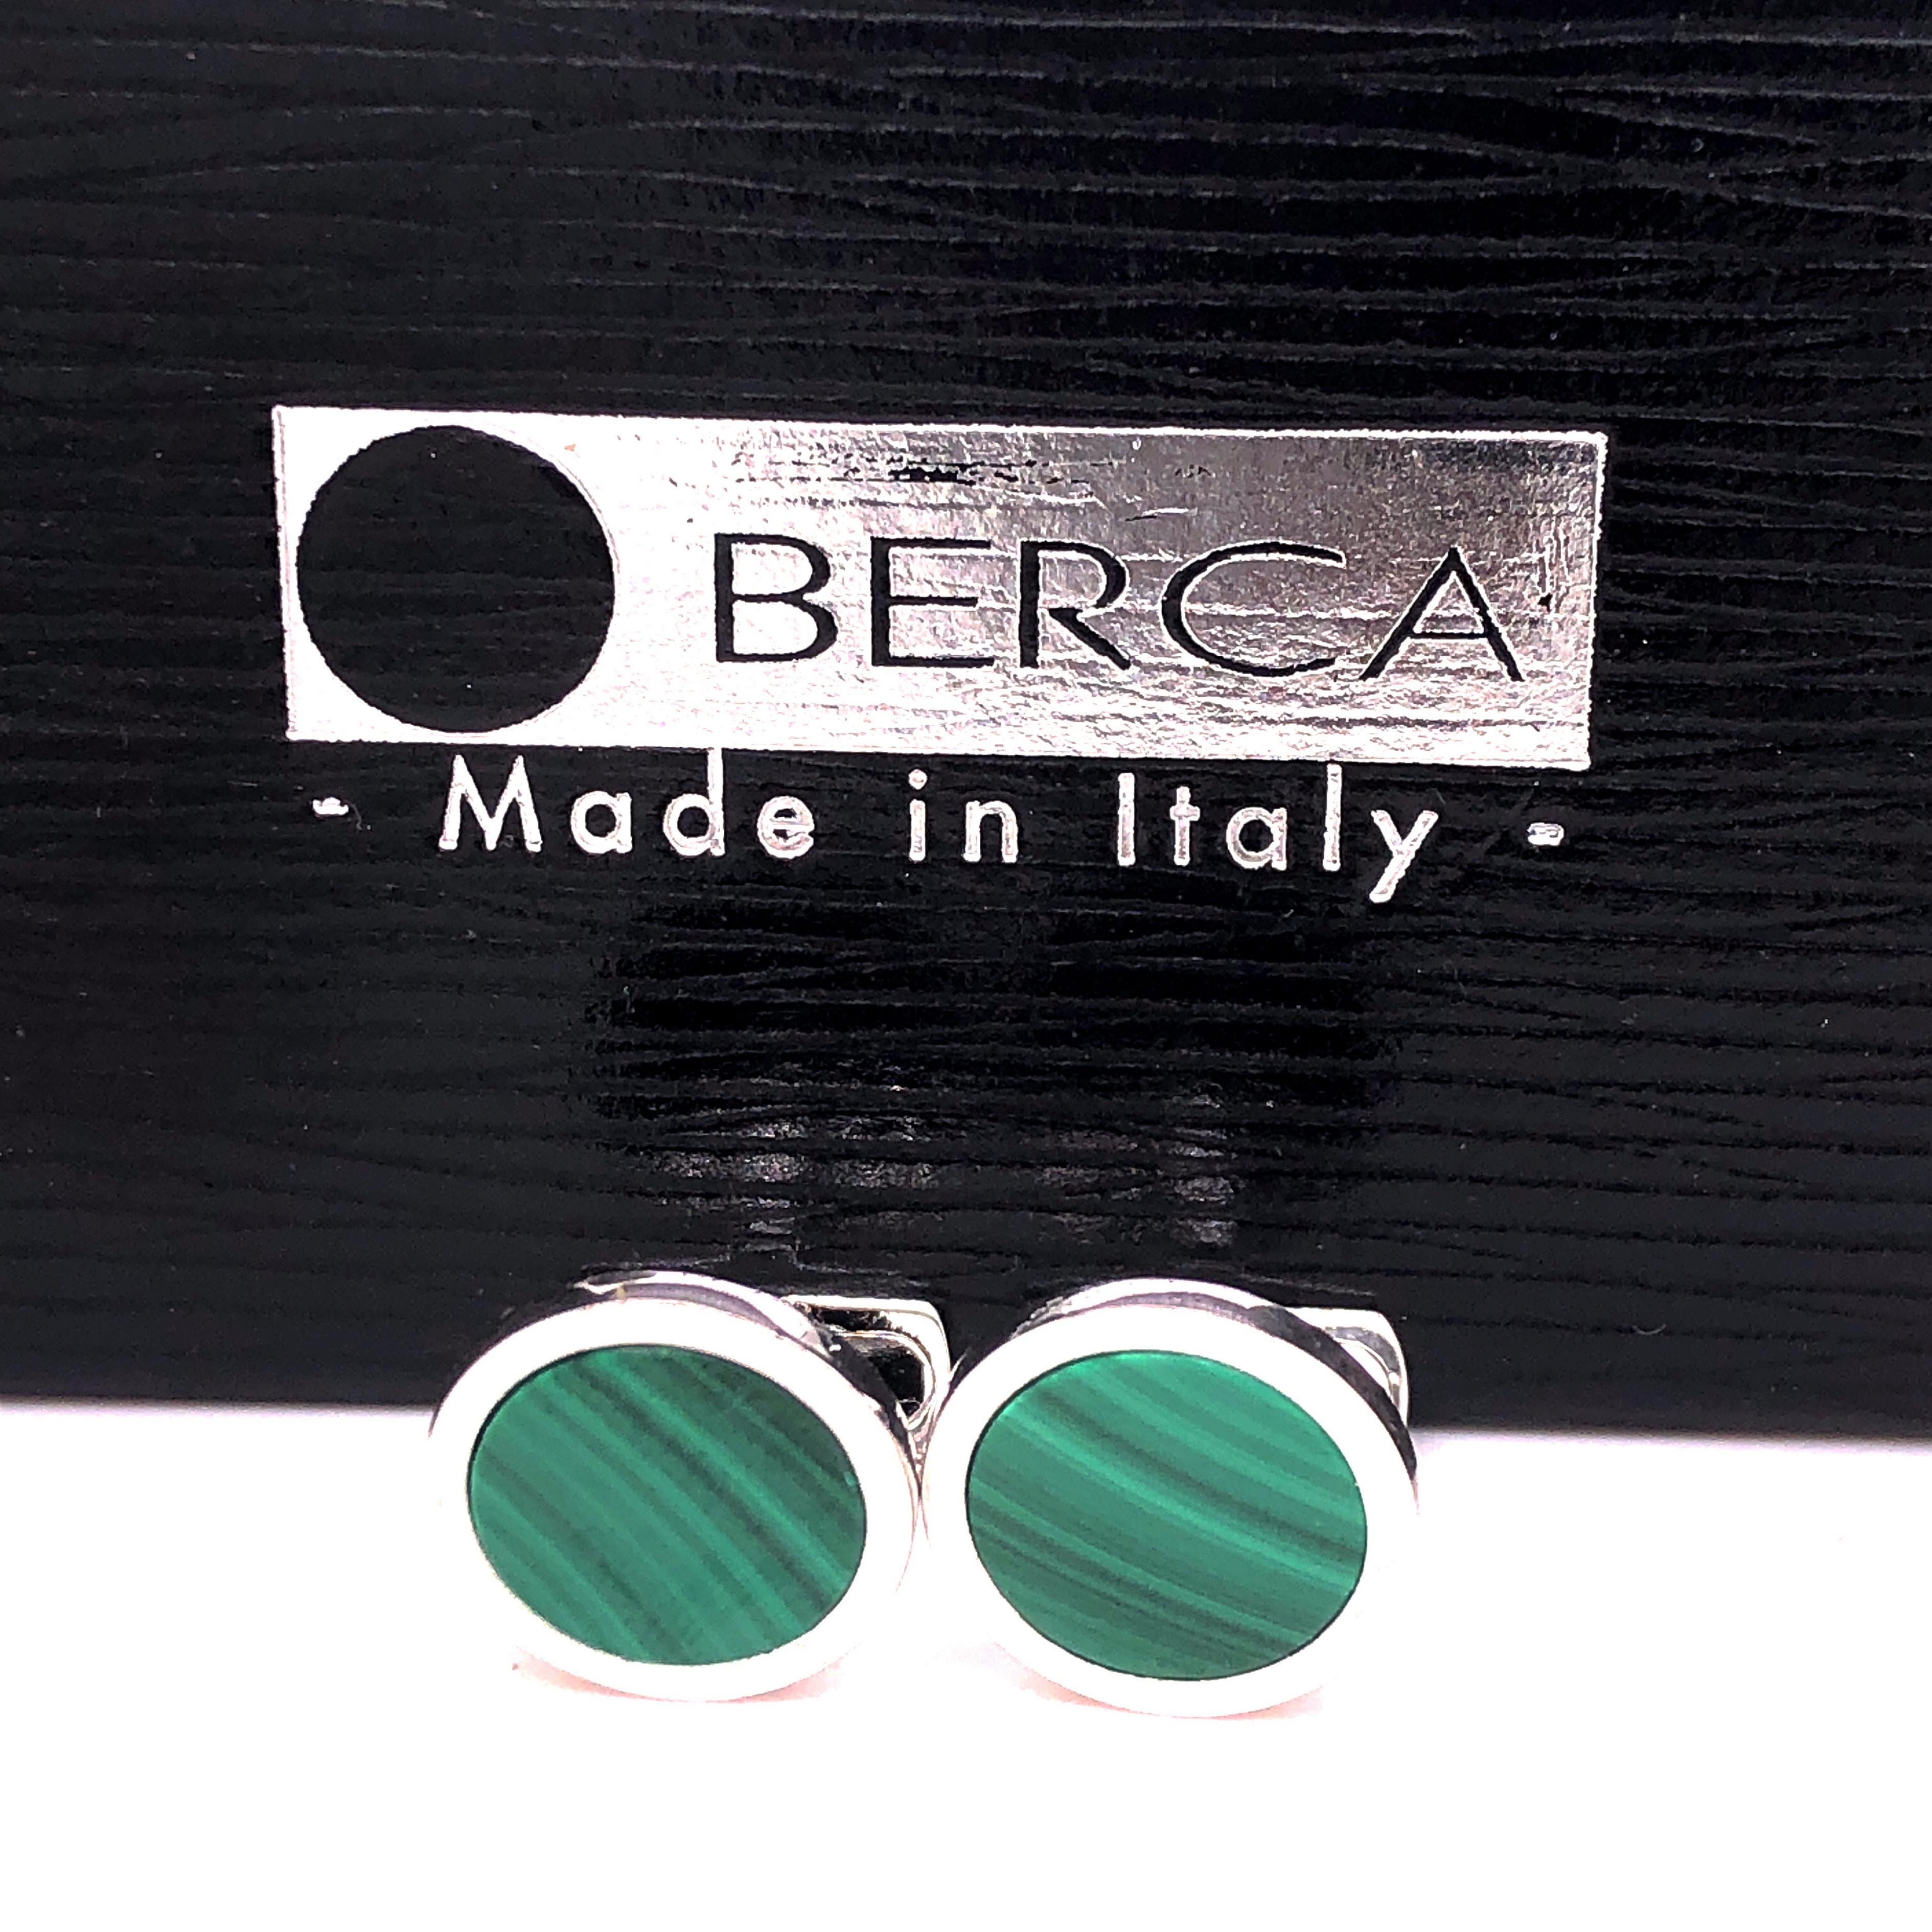 Chic and Timeless, Natural Hand Inlaid Green Malachite Round Shaped Sterling Silver Cufflinks, T-bar back.
In our smart fitted Black Box and Pouch.

